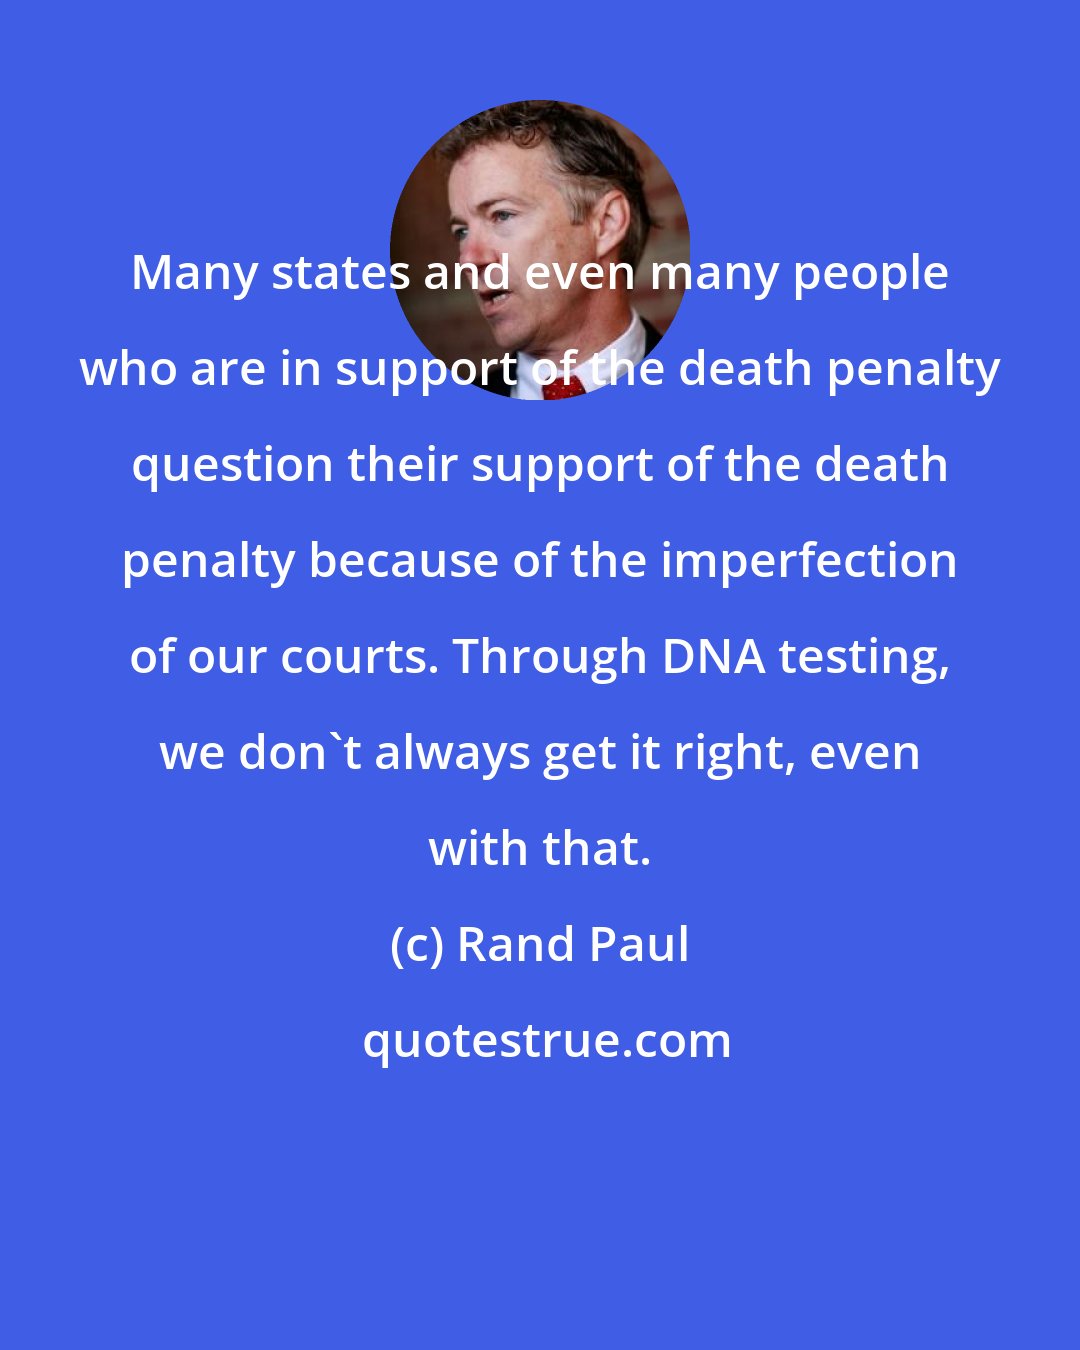 Rand Paul: Many states and even many people who are in support of the death penalty question their support of the death penalty because of the imperfection of our courts. Through DNA testing, we don't always get it right, even with that.